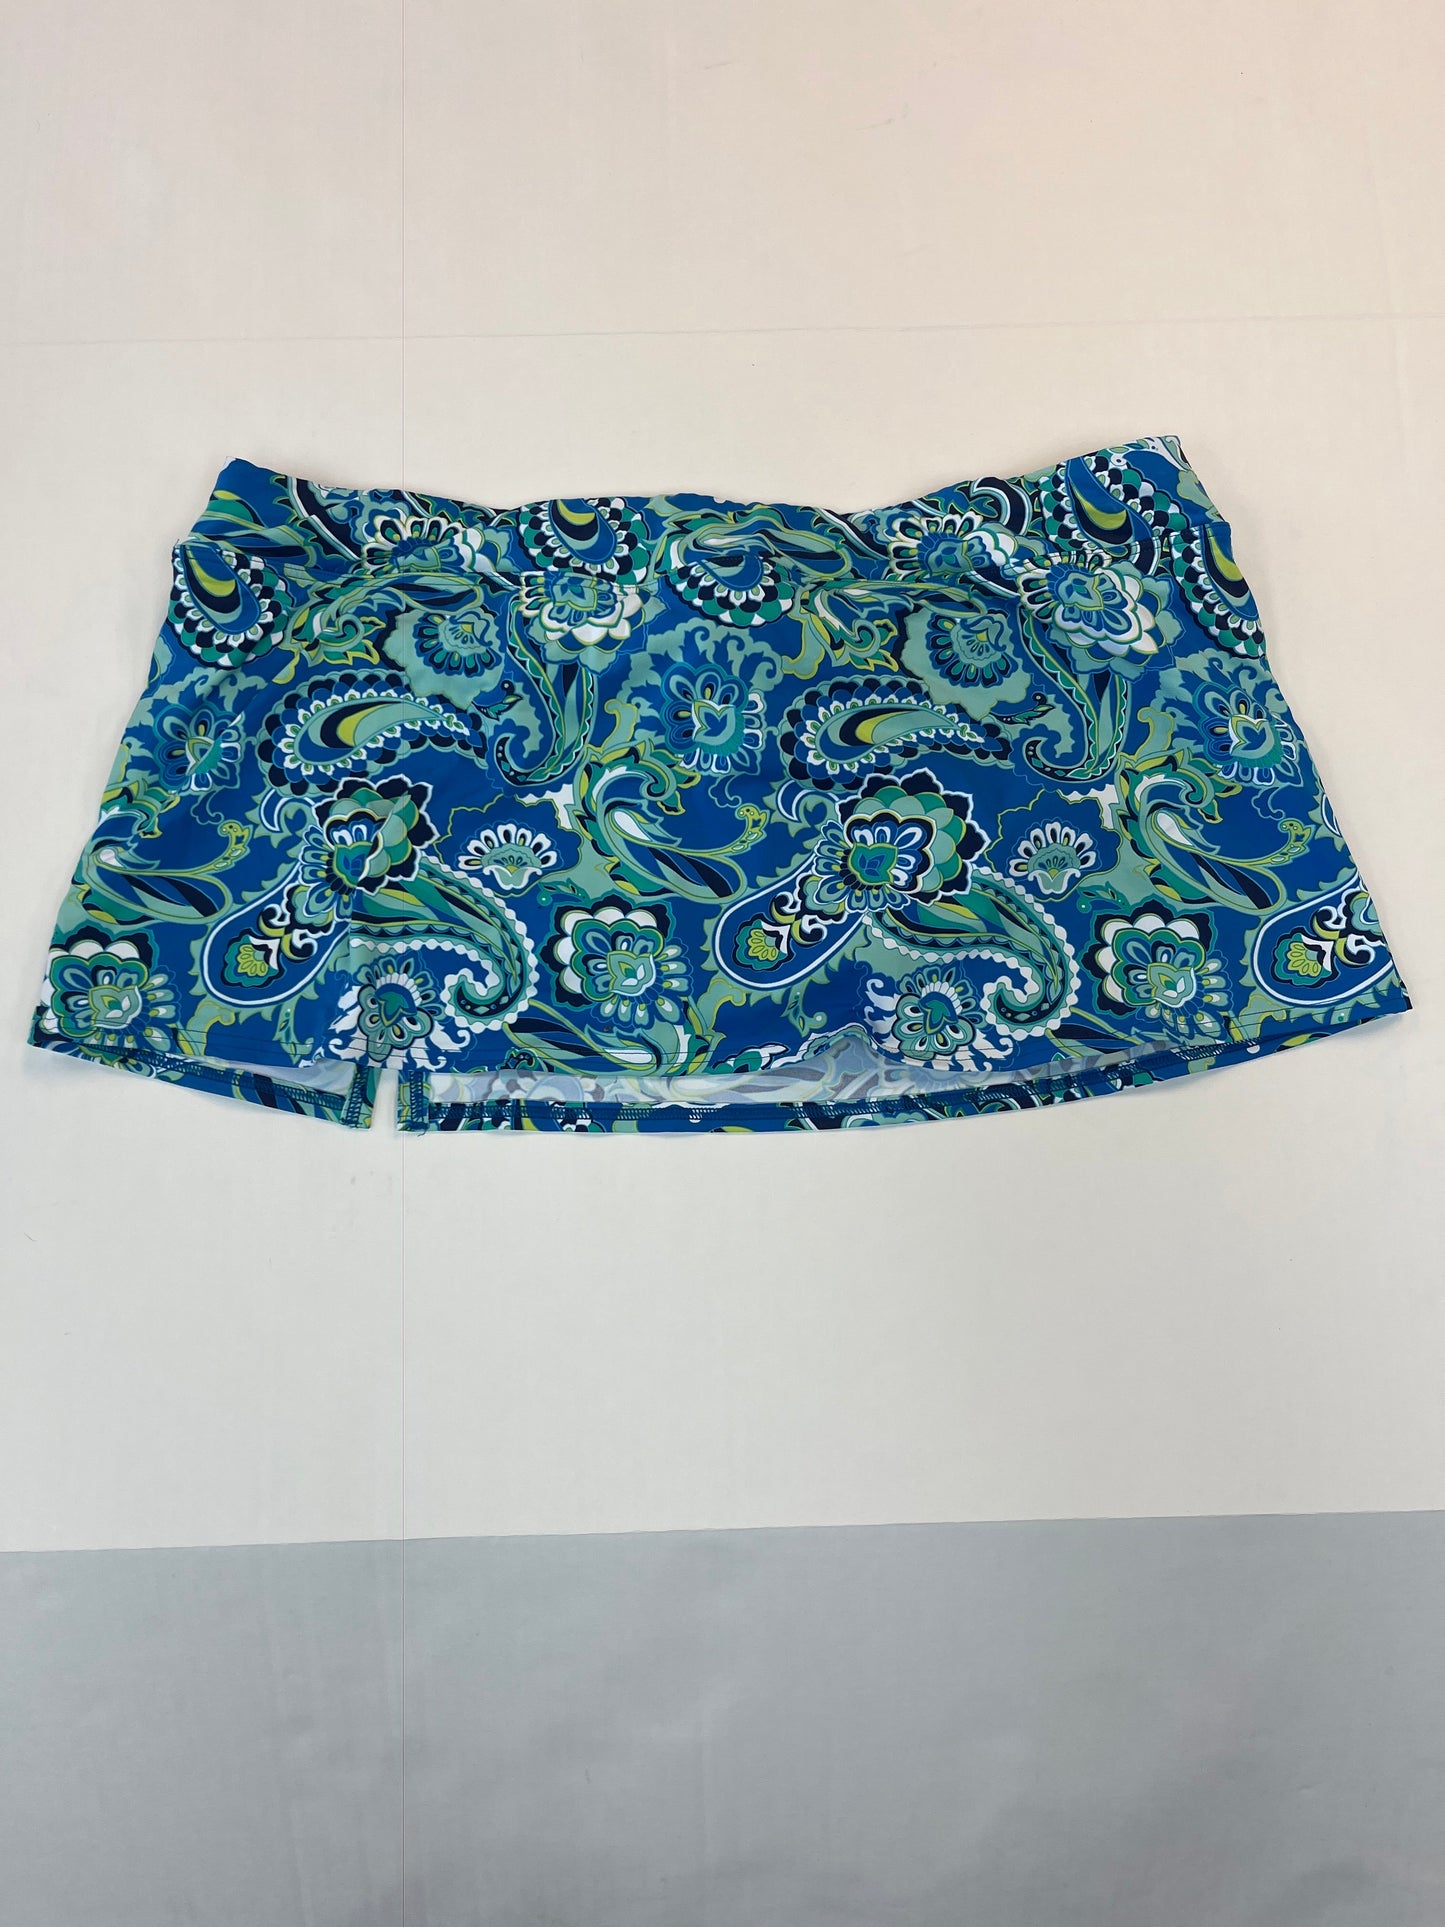 Swimsuit Bottom By Lands End  Size: Xl